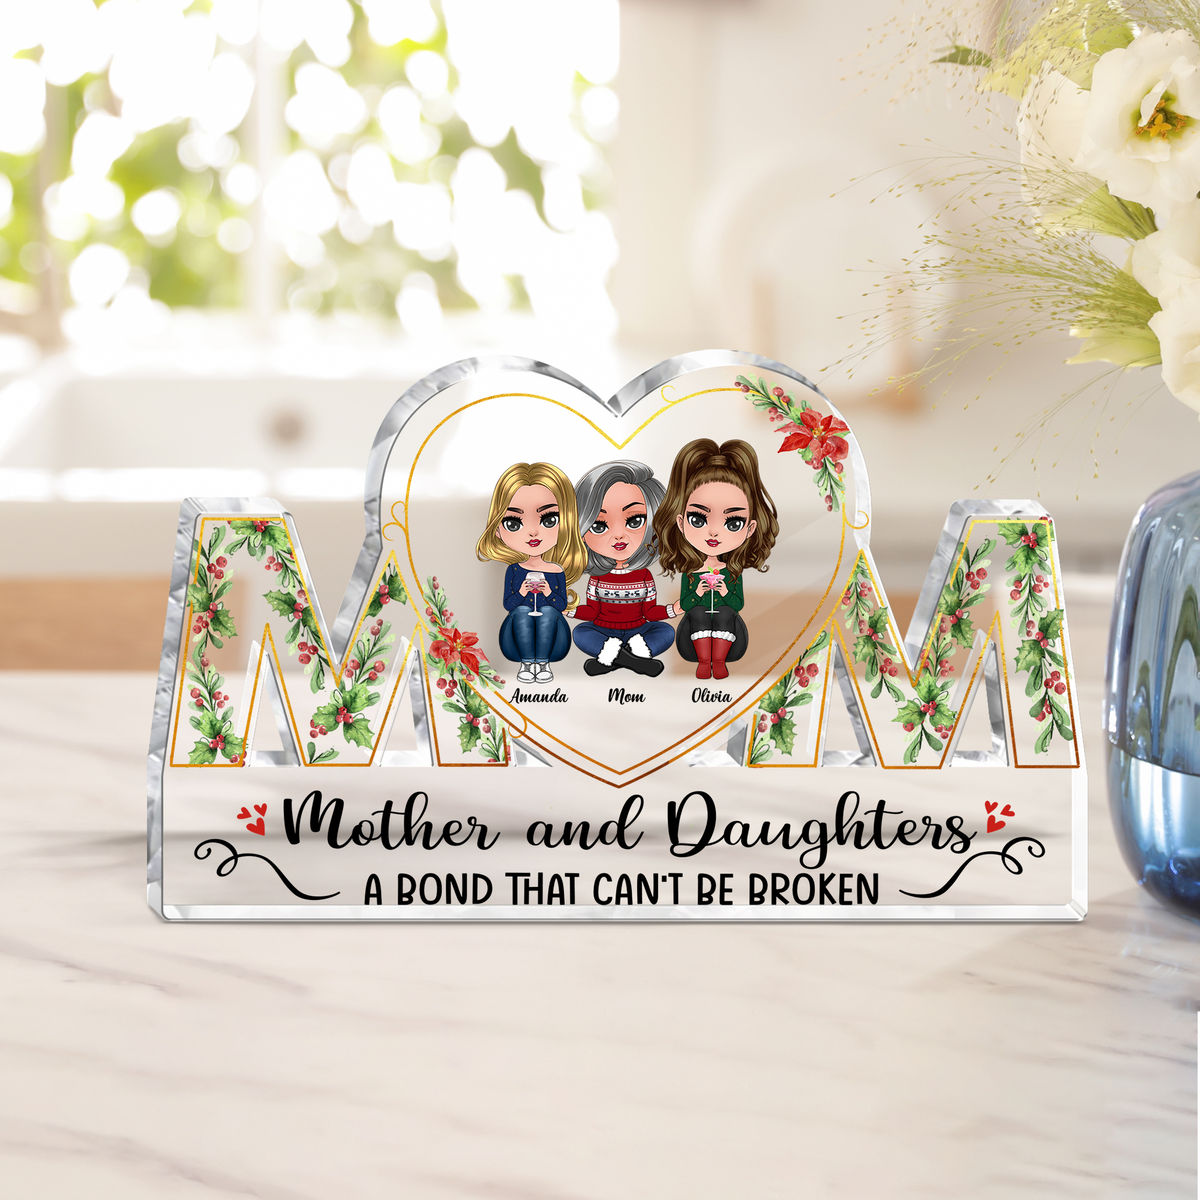 Transparent Plaque - Mother and Daughter - Mother and Daughter a bond that can't be broken ( Custom Acrylic Plaque)_2